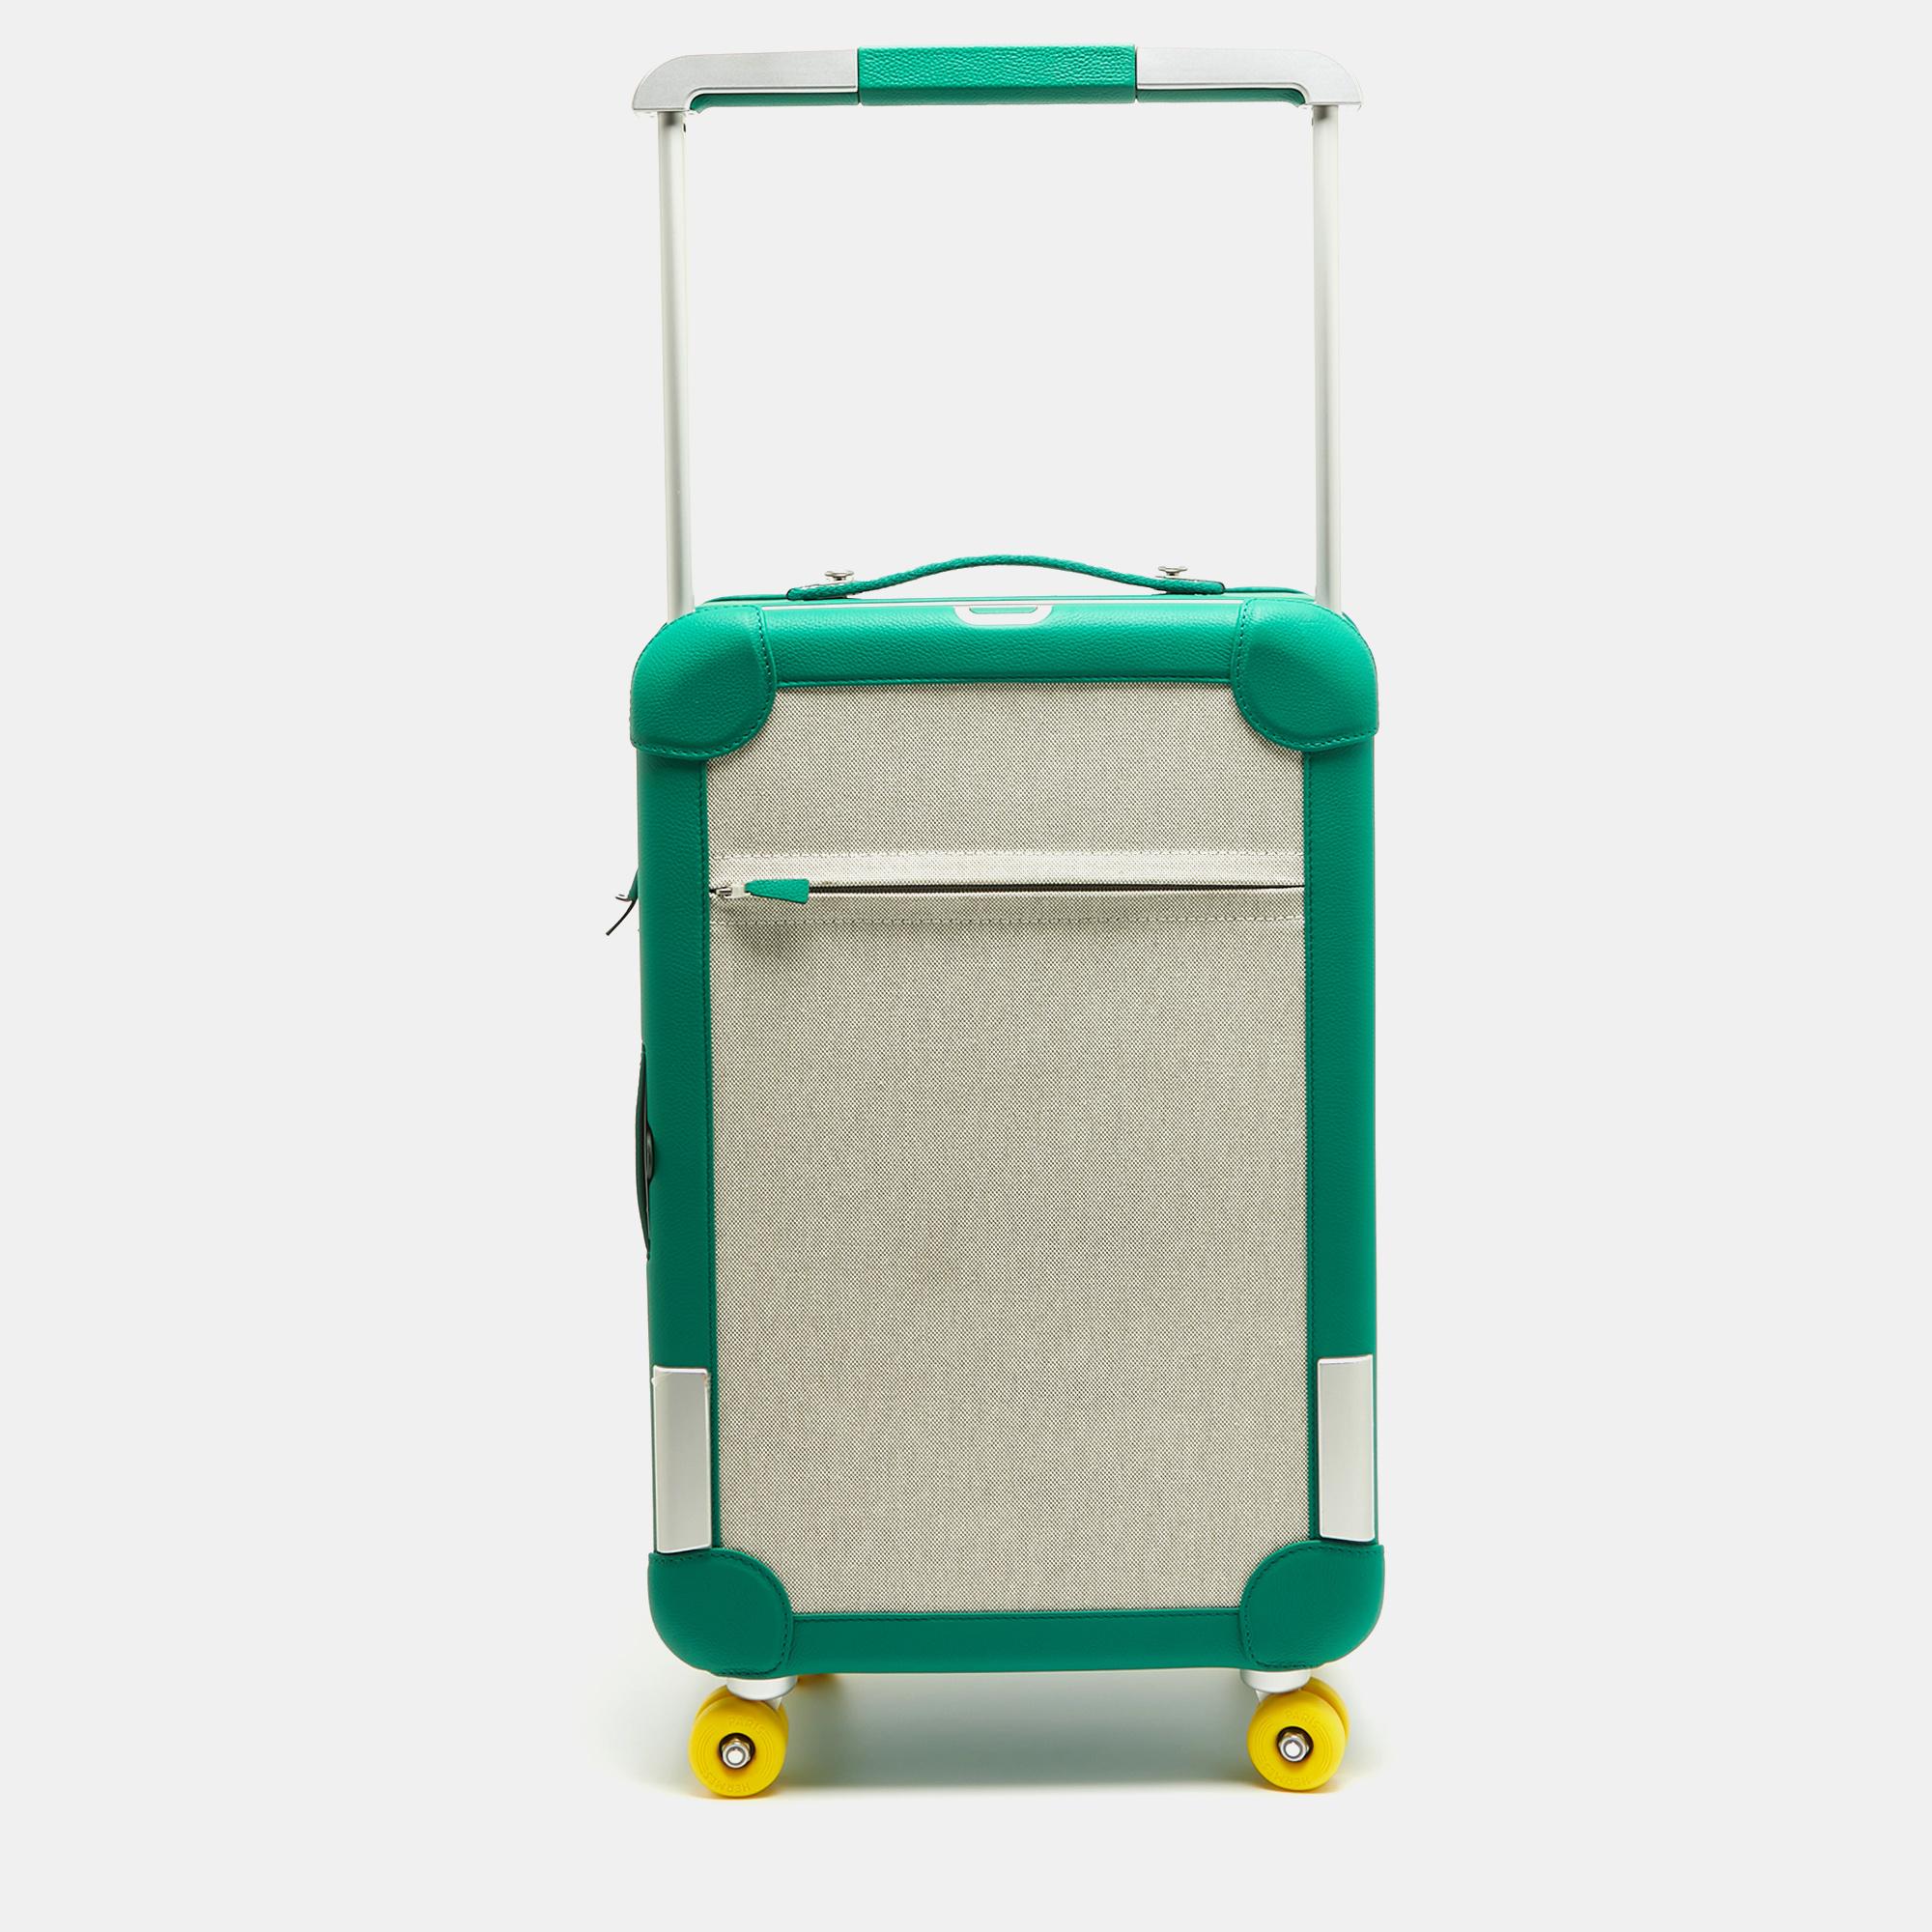 Travel to the places your heart desires with this Hermes trolley luggage. It is made of high-grade materials in a spacious size. Robust and ultra-mobile, it glides along smoothly on its wheels, while its ingeniously arranged interior boasts many